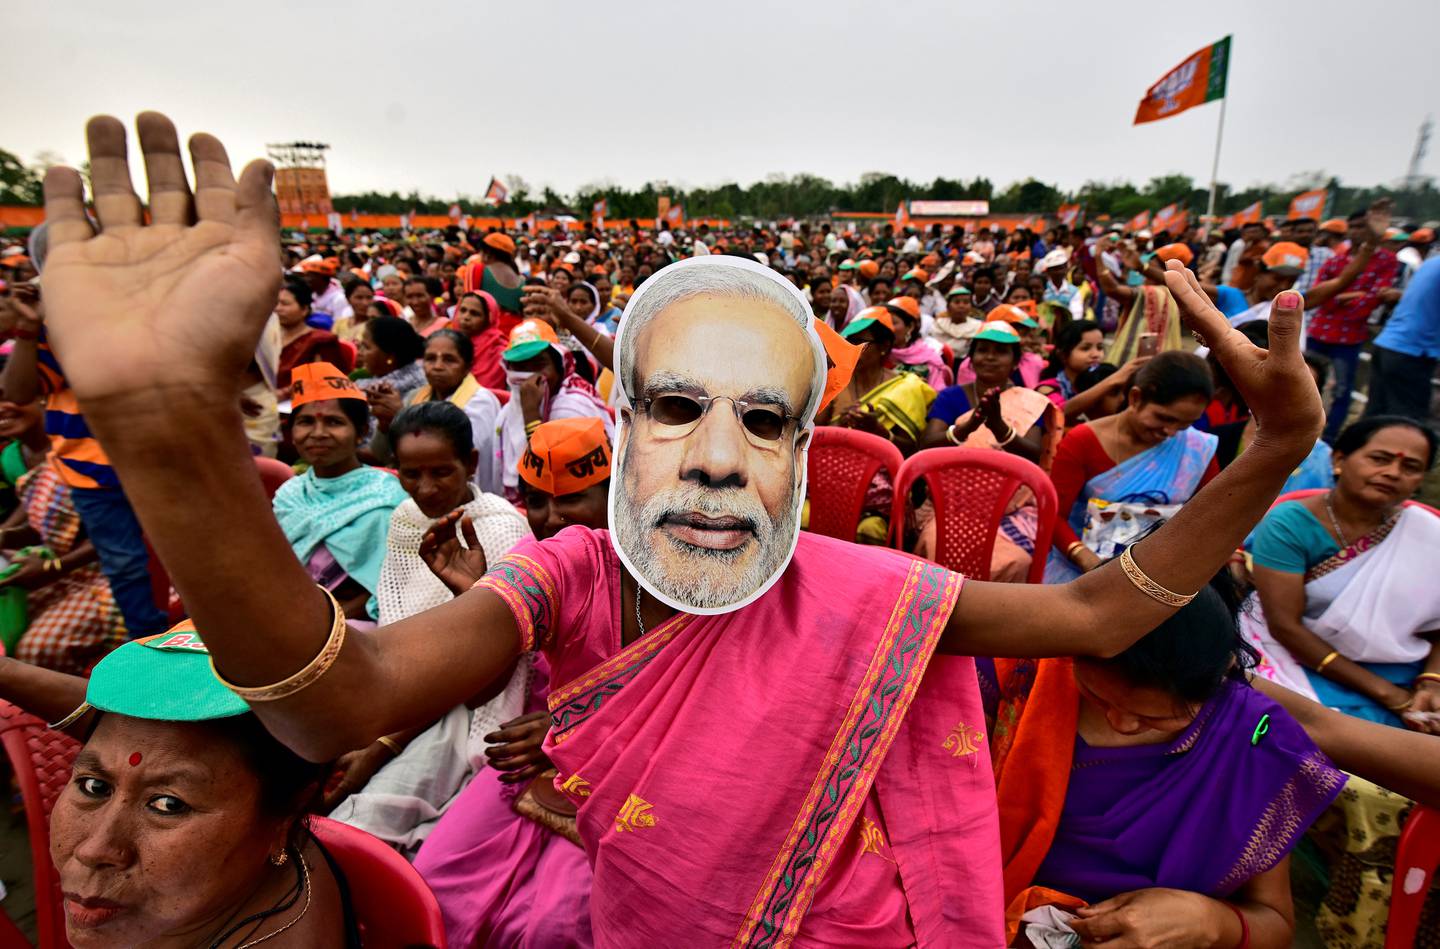 FILE PHOTO: A woman wearing a mask of Prime Minister Narendra Modi dances as she attends an election campaign rally being addressed by India's ruling Bharatiya Janata Party (BJP) President Amit Shah at Ahatguri village in Morigaon district in the northeastern state of Assam, India, April 5, 2019. REUTERS/Anuwar Hazarika/File Photo